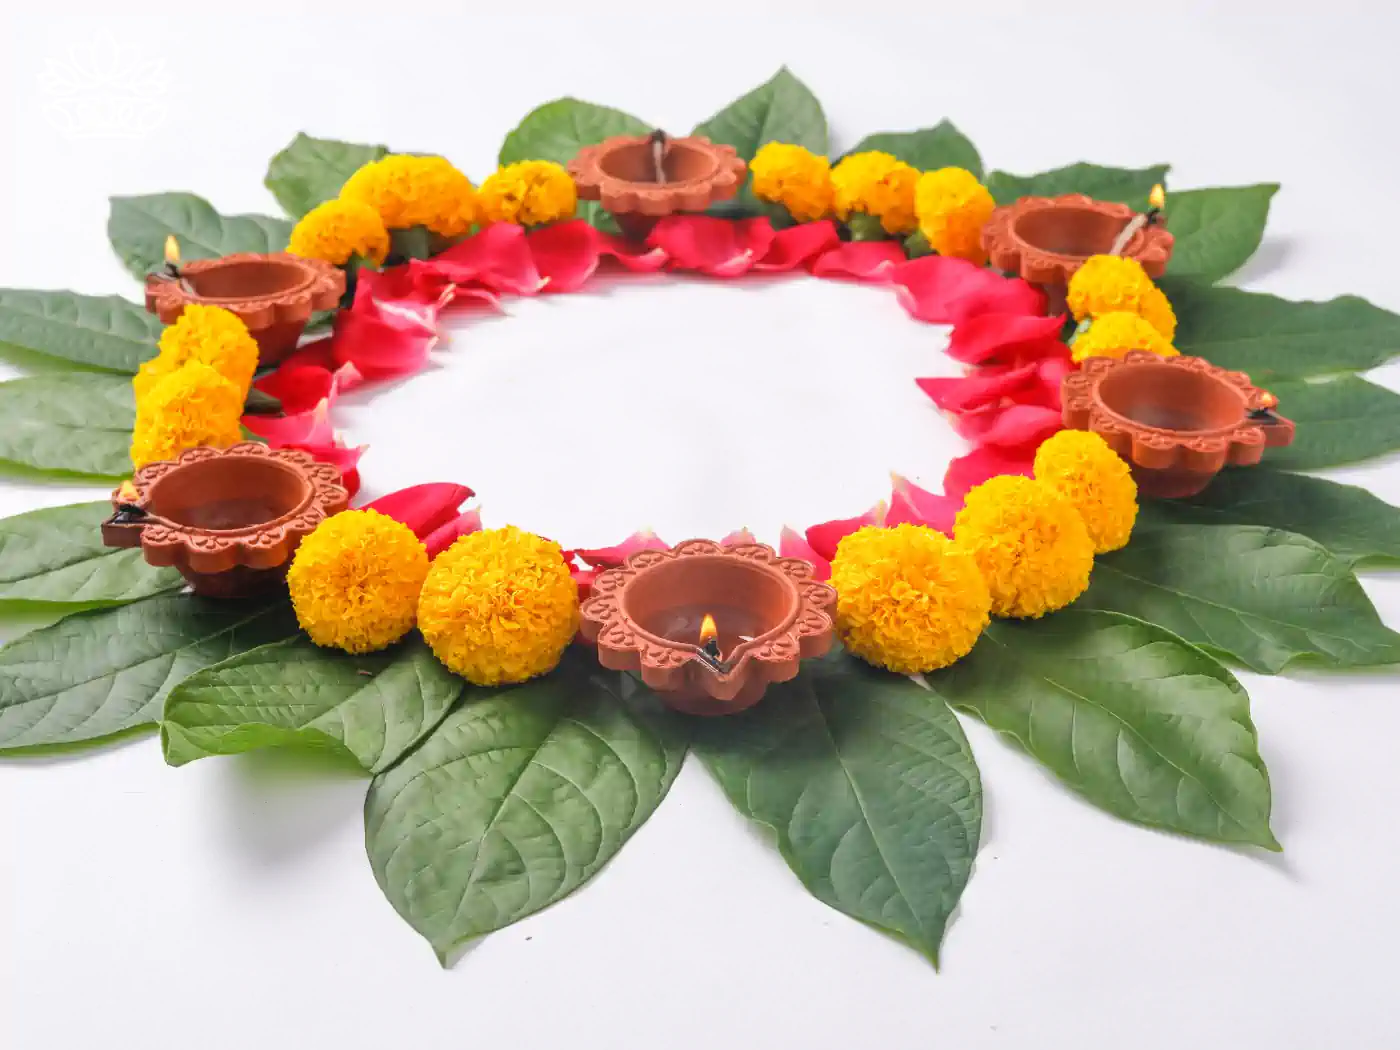 The Festival marks, A circular arrangement of bright yellow marigolds and red rose petals on green leaves, interspersed with lit clay oil lamps, creating a festive and traditional Diwali decoration. Fabulous Flowers and Gifts - Diwali Flowers. Delivered with Heart.